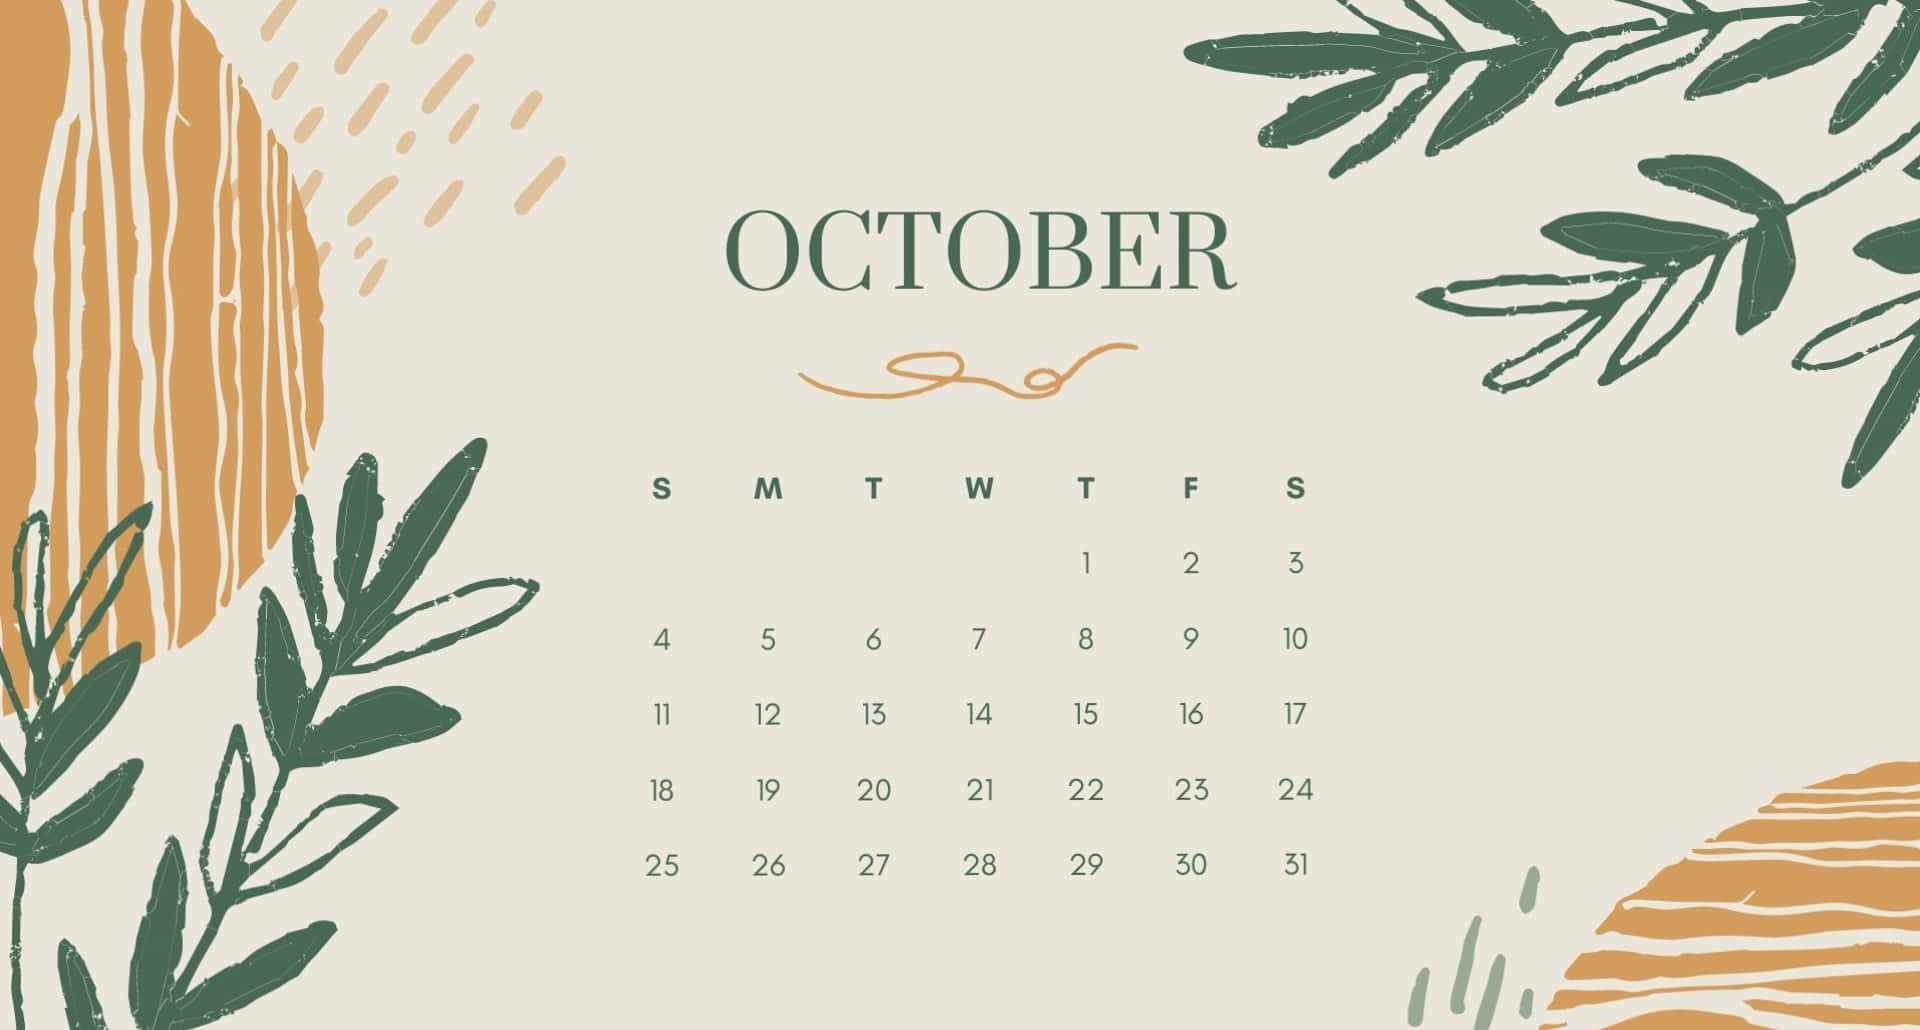 October Calendar With Leaves And Leaves